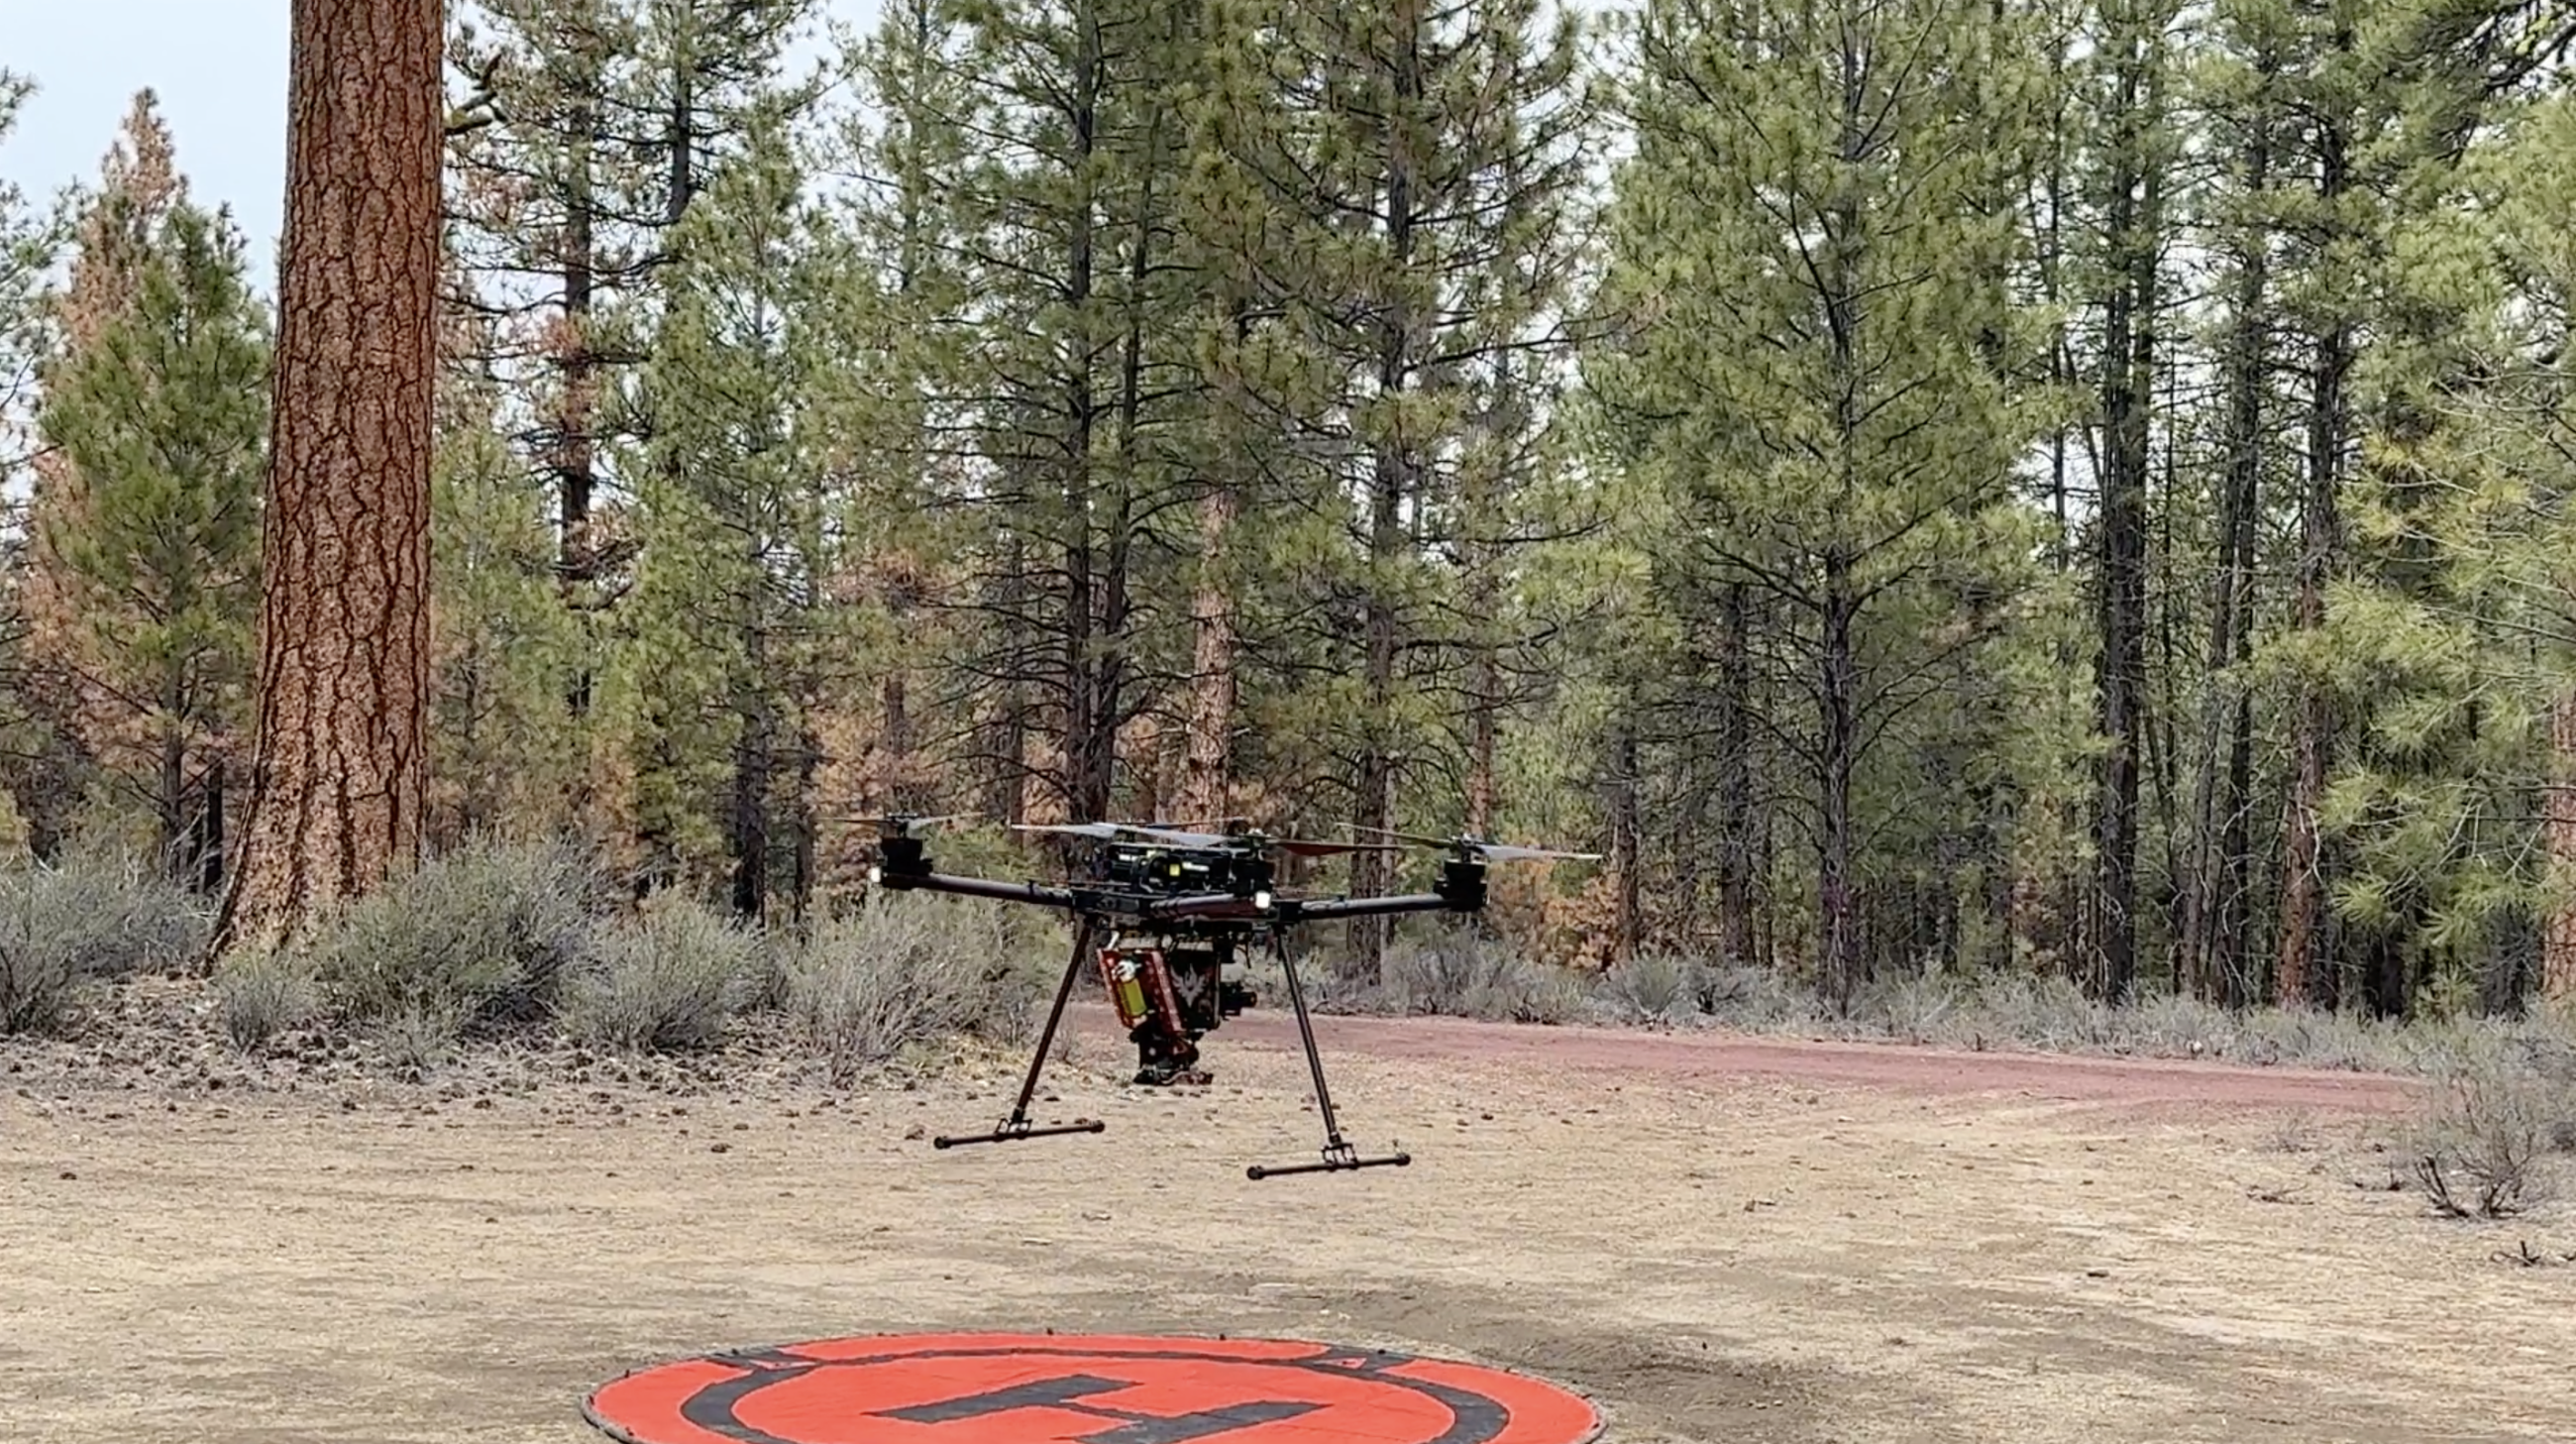 A drone takes off from an orange H pad in the forest